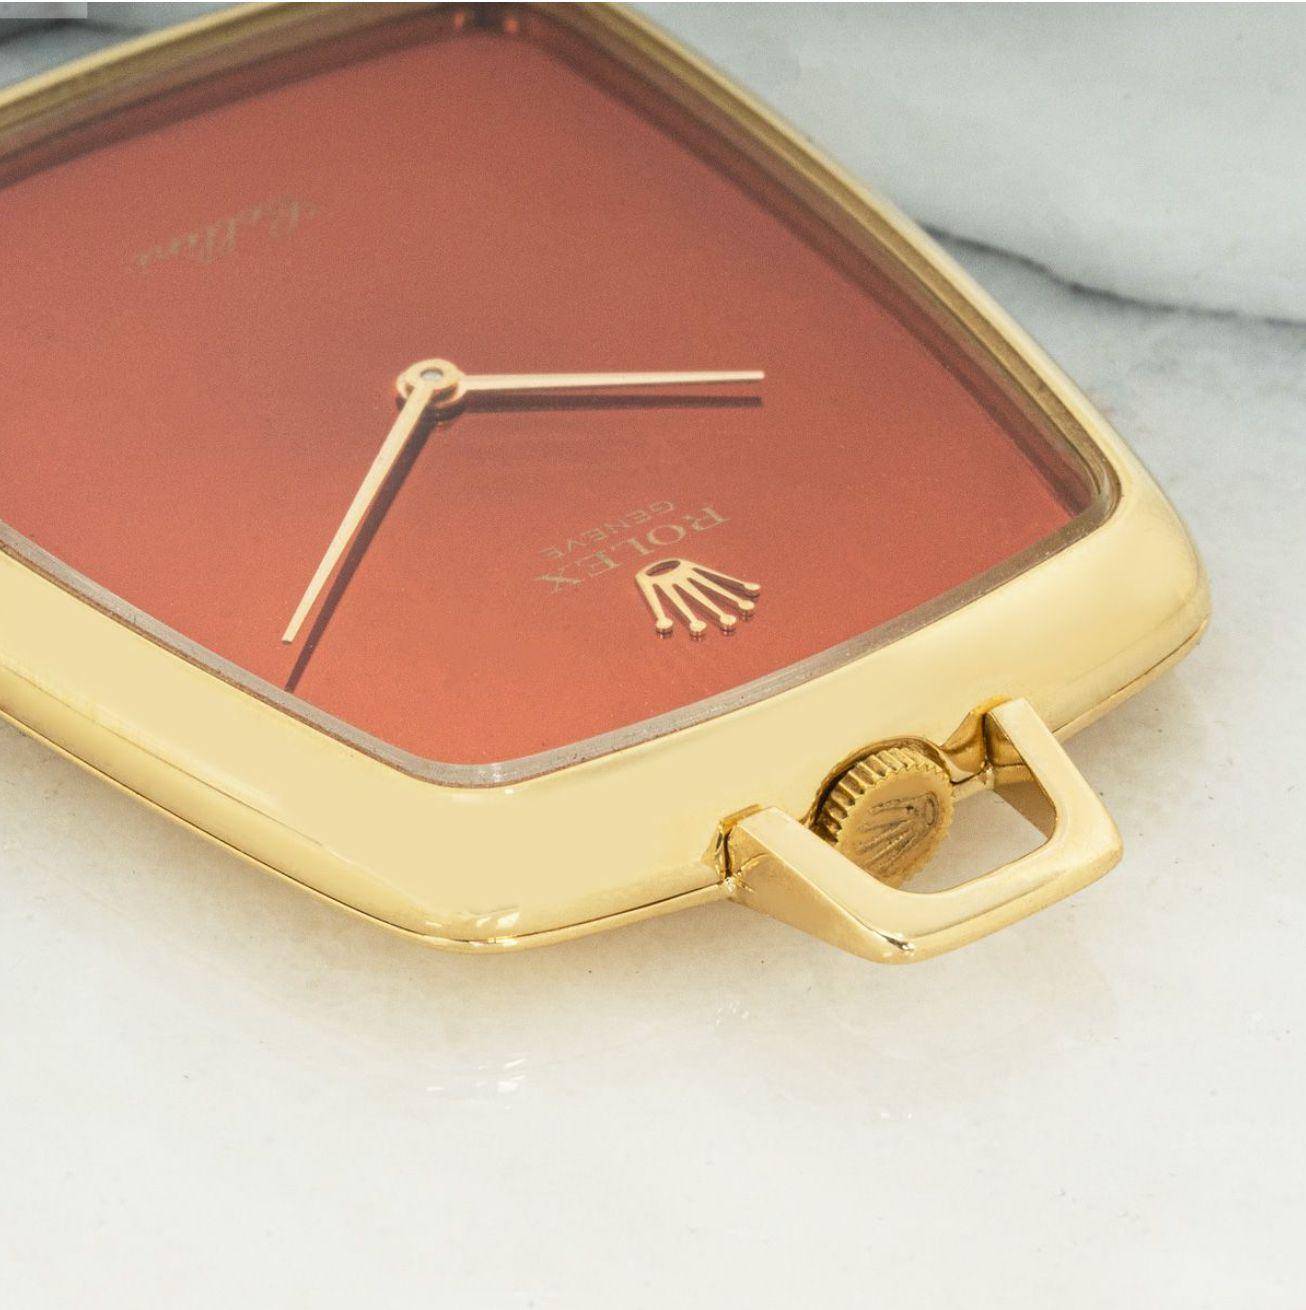 Rolex Cellini. A Rare Coral Coloured Dial,18ct Yellow Gold Keyless Lever Dress Open Face Pocket Watch C1970.

Dial: The Coral coloured dial fully signed Rolex Geneve and signed Cellini at six o'clock with gold pointer hands.

Case: The 18ct yellow